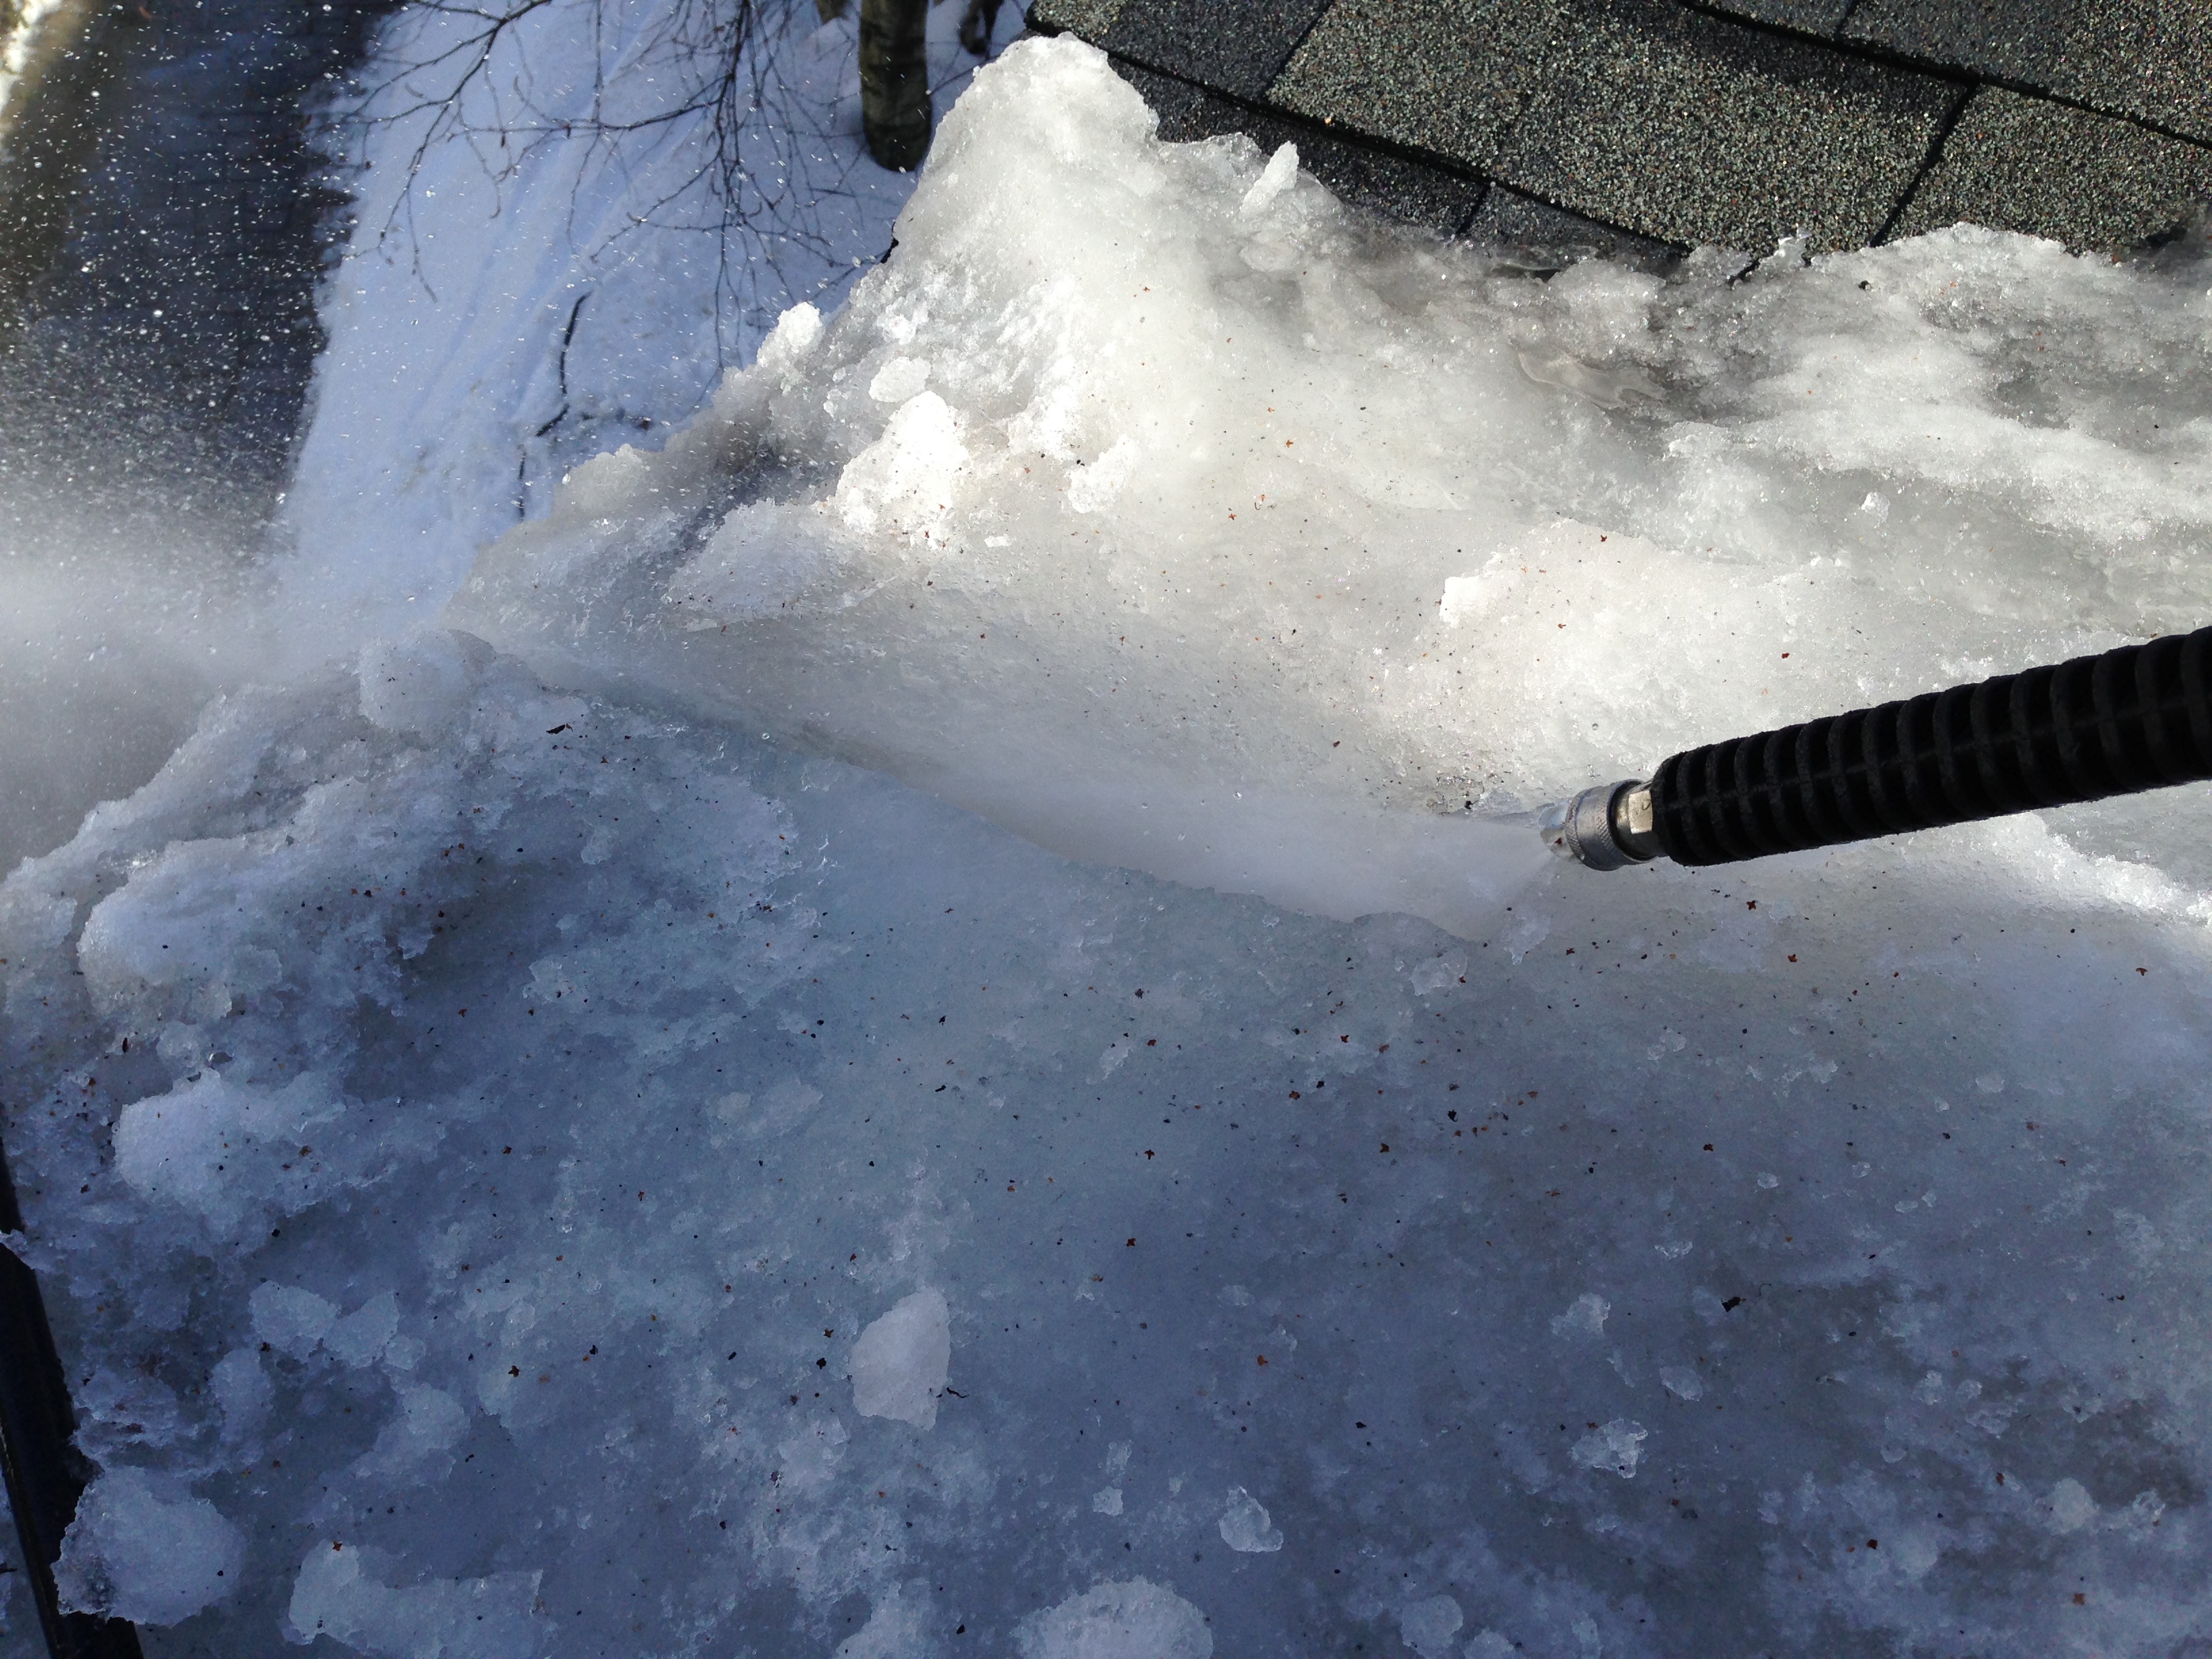 steam removal of an ice dam - call us 24 hours a day - roof to deck ice dam removal - minneapolis